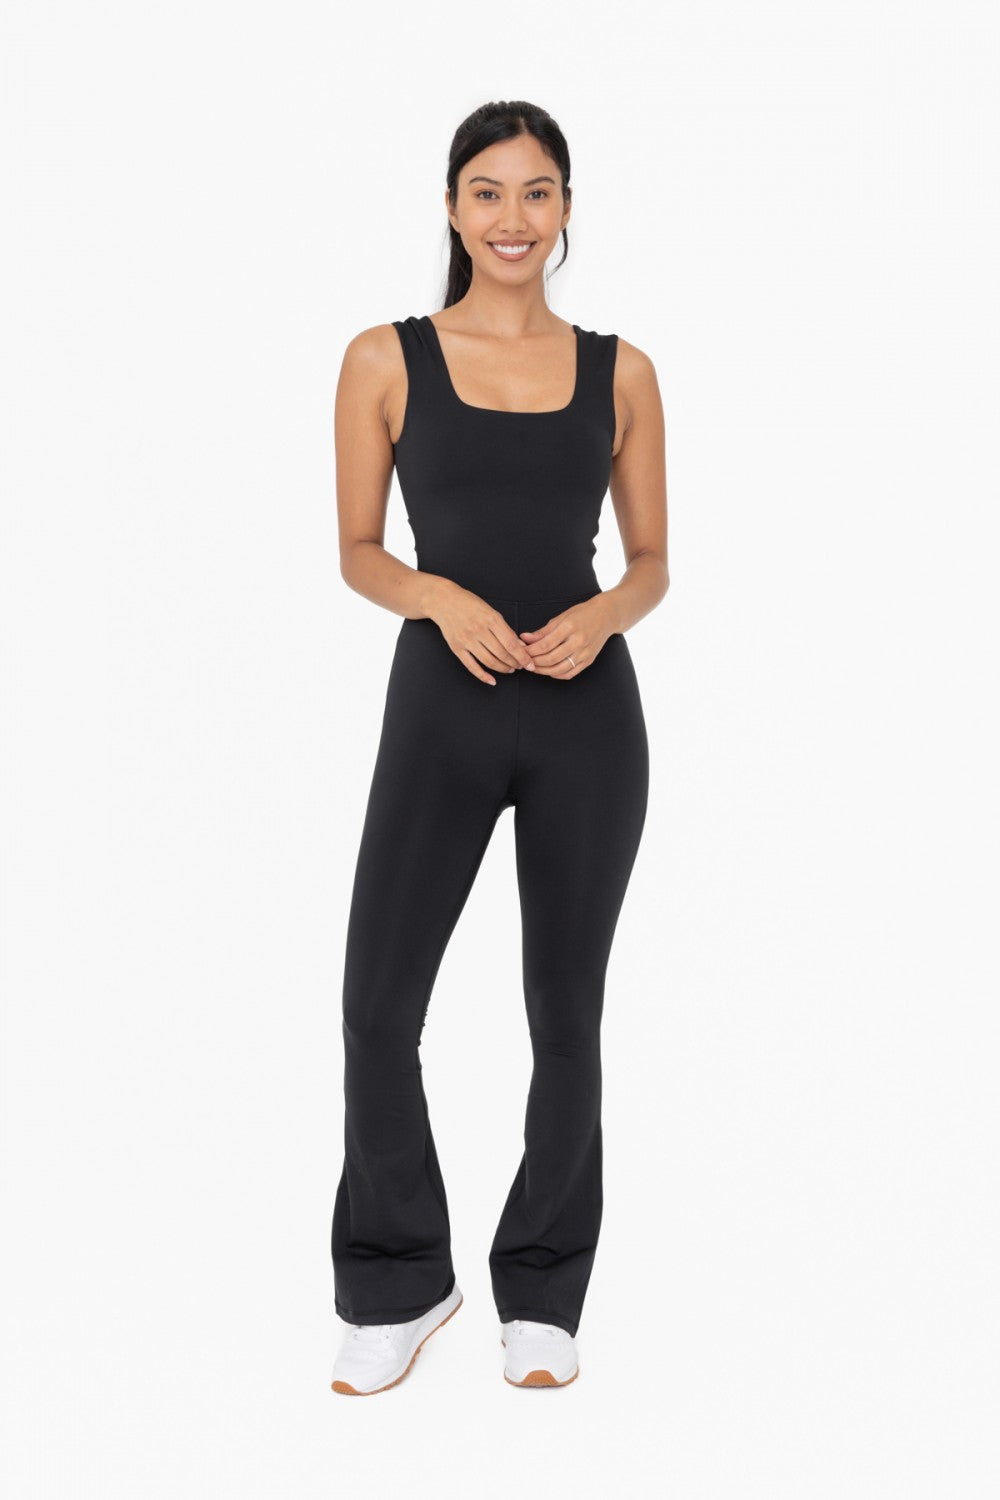 Our Laguna Twist Back Jumpsuit is designed to make you look and feel fabulous. Crafted with premium fabric and featuring a flare leg, open back, and square neckline, this jumpsuit flatters any figure. Not to mention, it comes with built-in bra support and thick, supportive straps for ultimate comfort and security. For the modern millennial woman, this jumpsuit is a must-have!      75% Polyester, 25% Spandex     True to Size fit, snug fit     Flare leg     Machine was cold, hang dry.